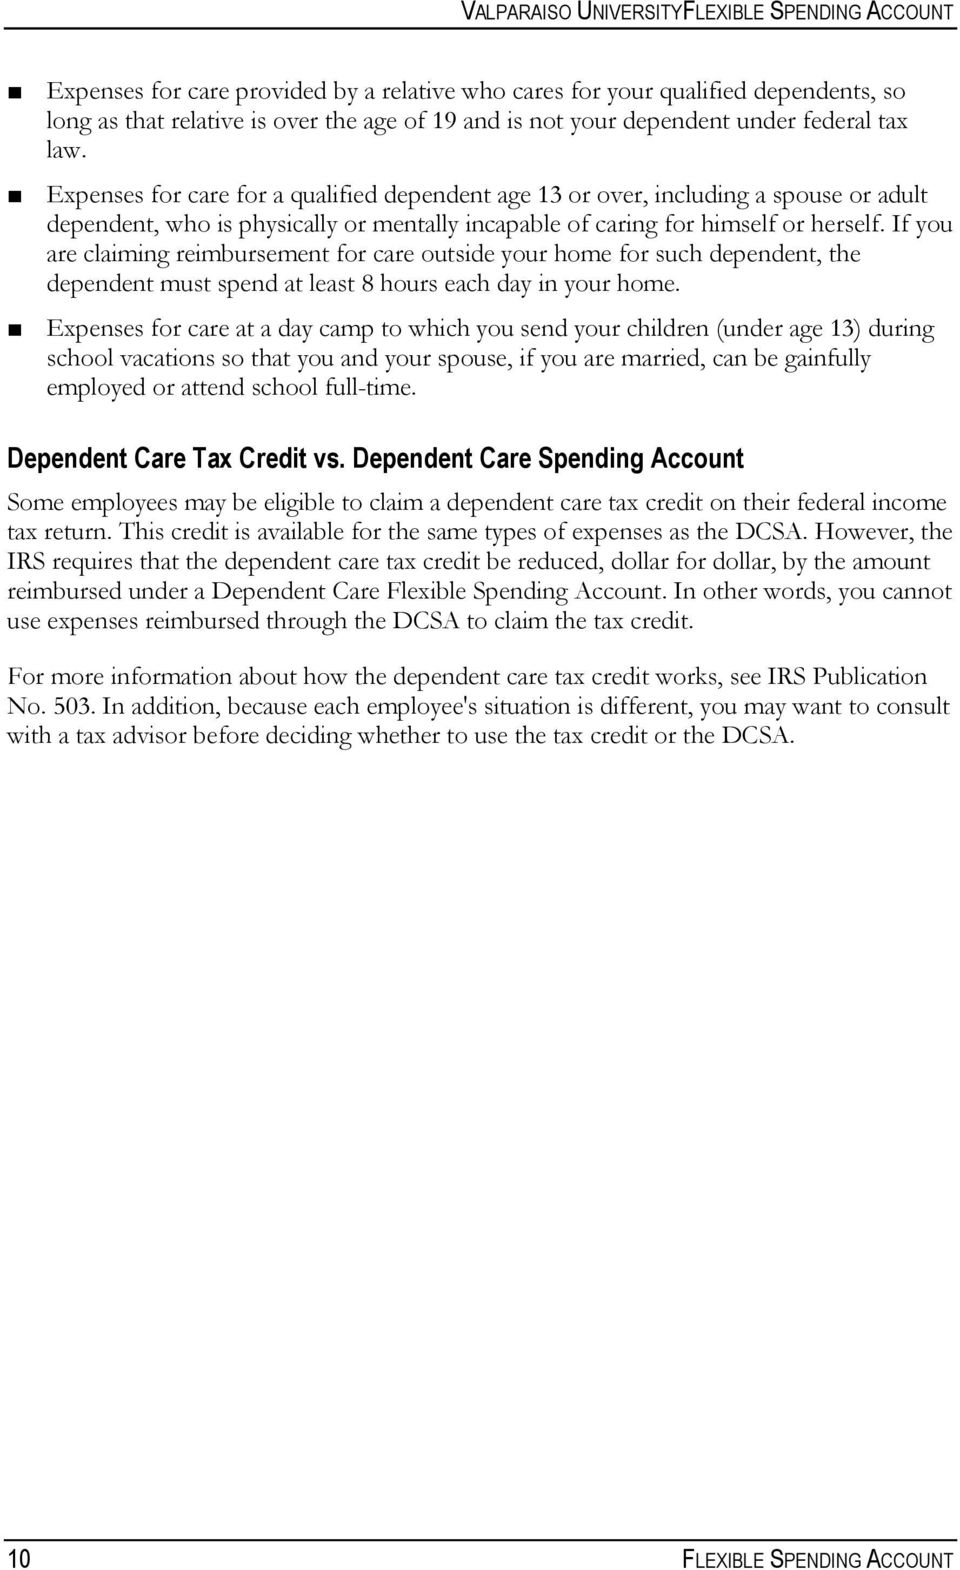 Expenses for care for a qualified dependent age 13 or over, including a spouse or adult dependent, who is physically or mentally incapable of caring for himself or herself.